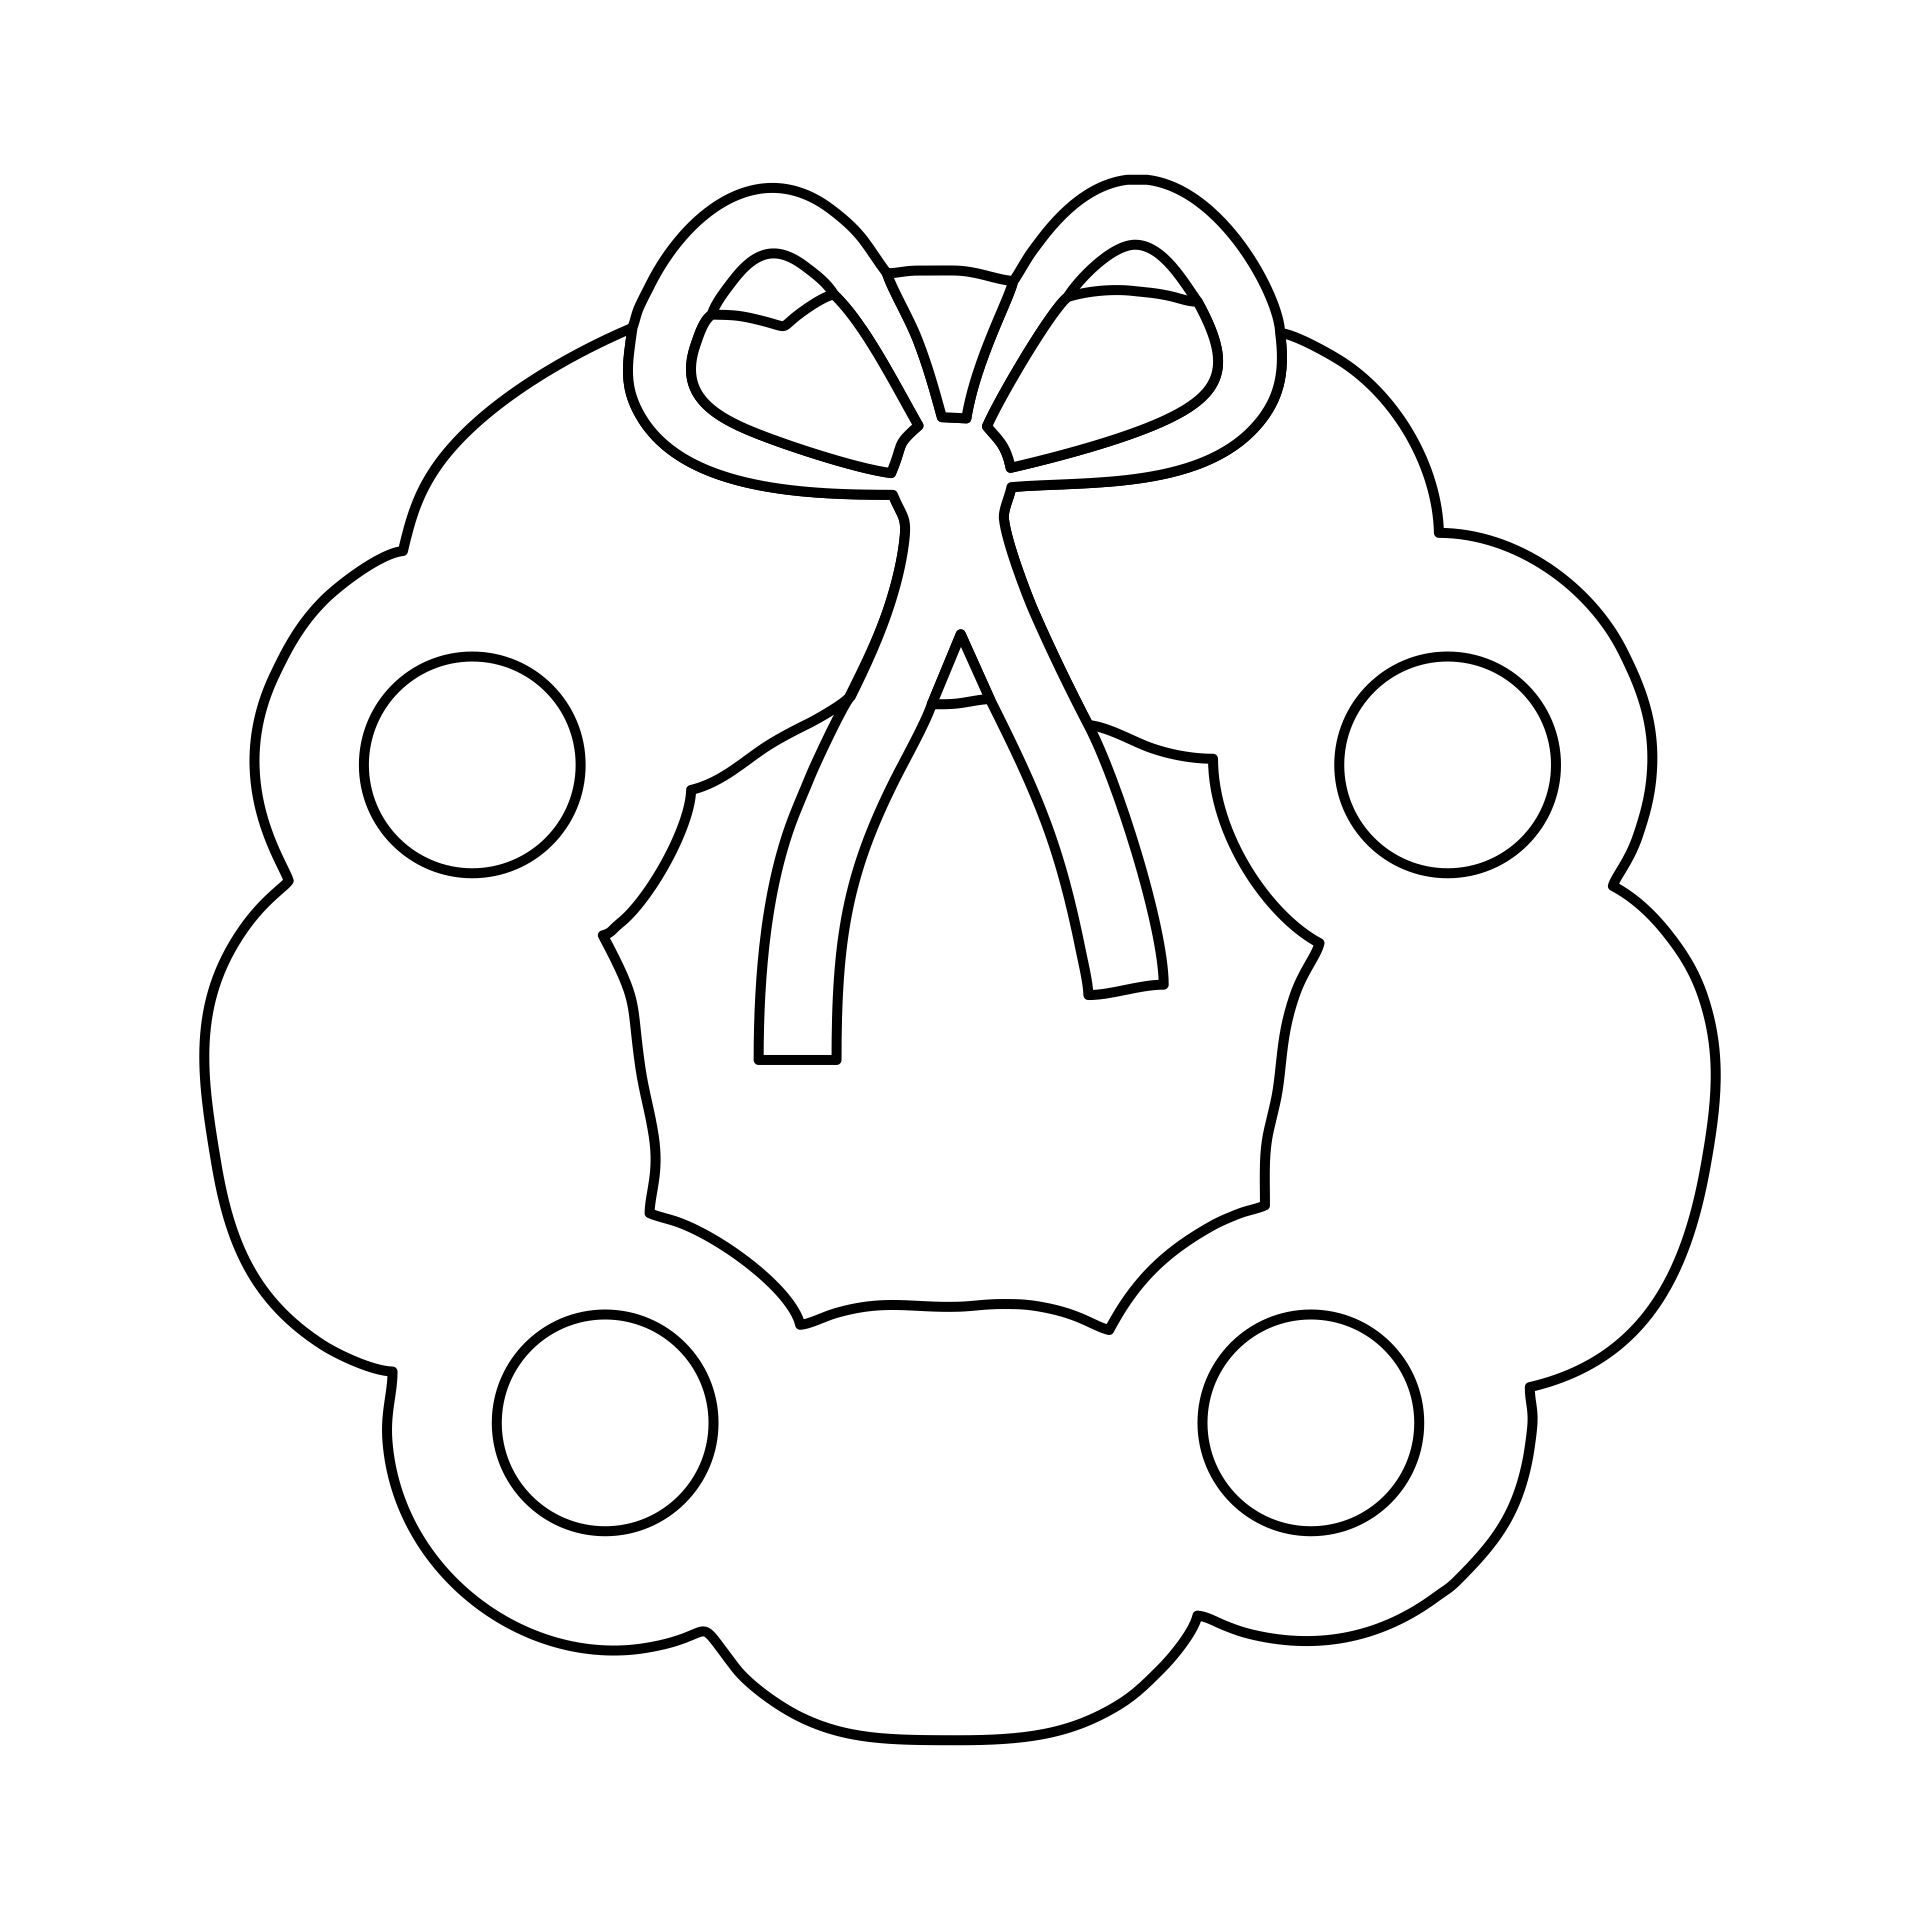 Template For Christmas Wreath